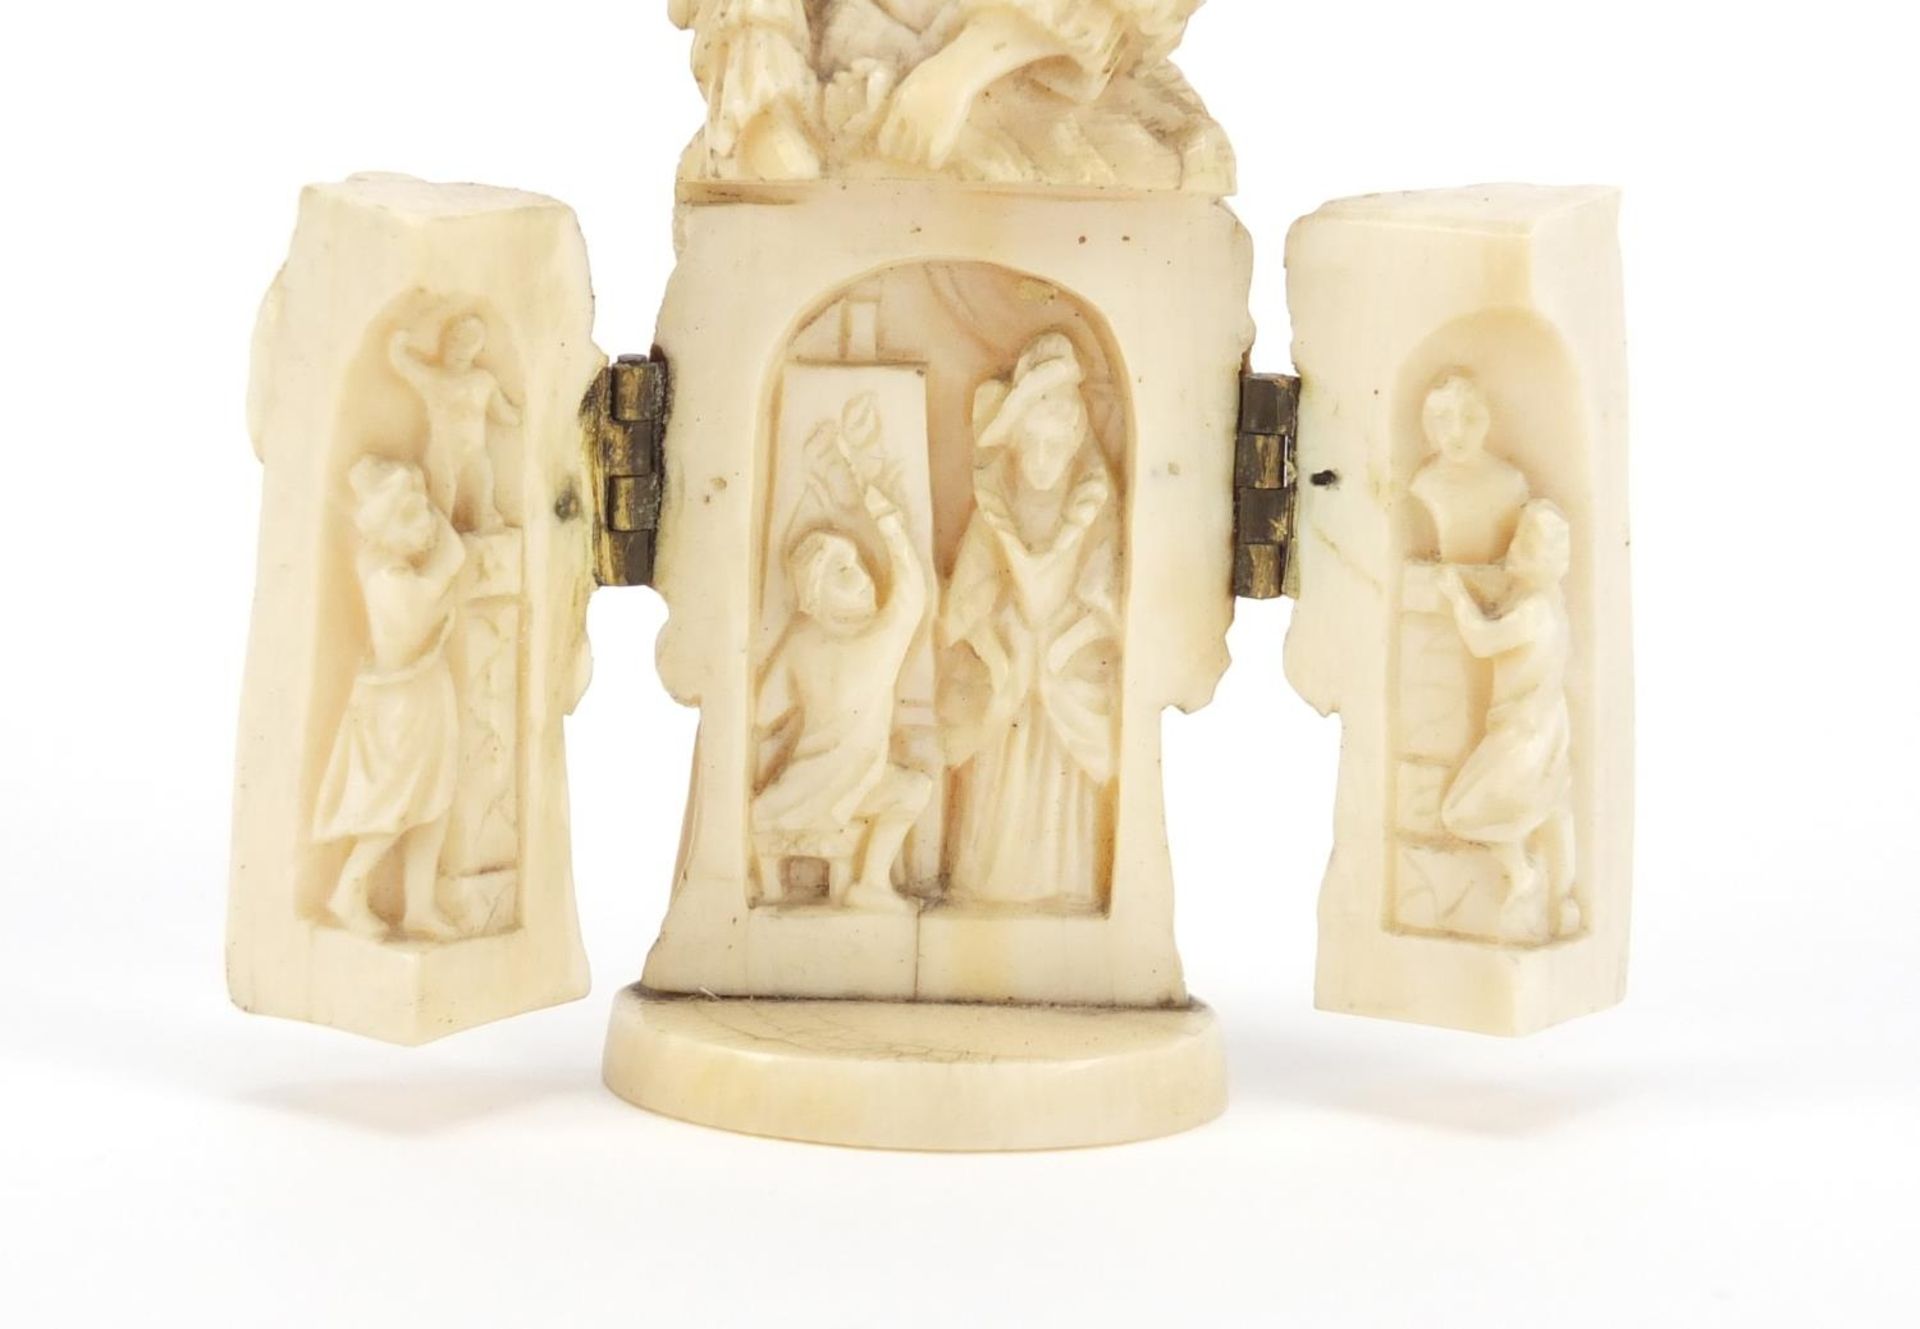 19th century French Dieppe carved ivory tryptych figure, 9cm high - Image 2 of 9